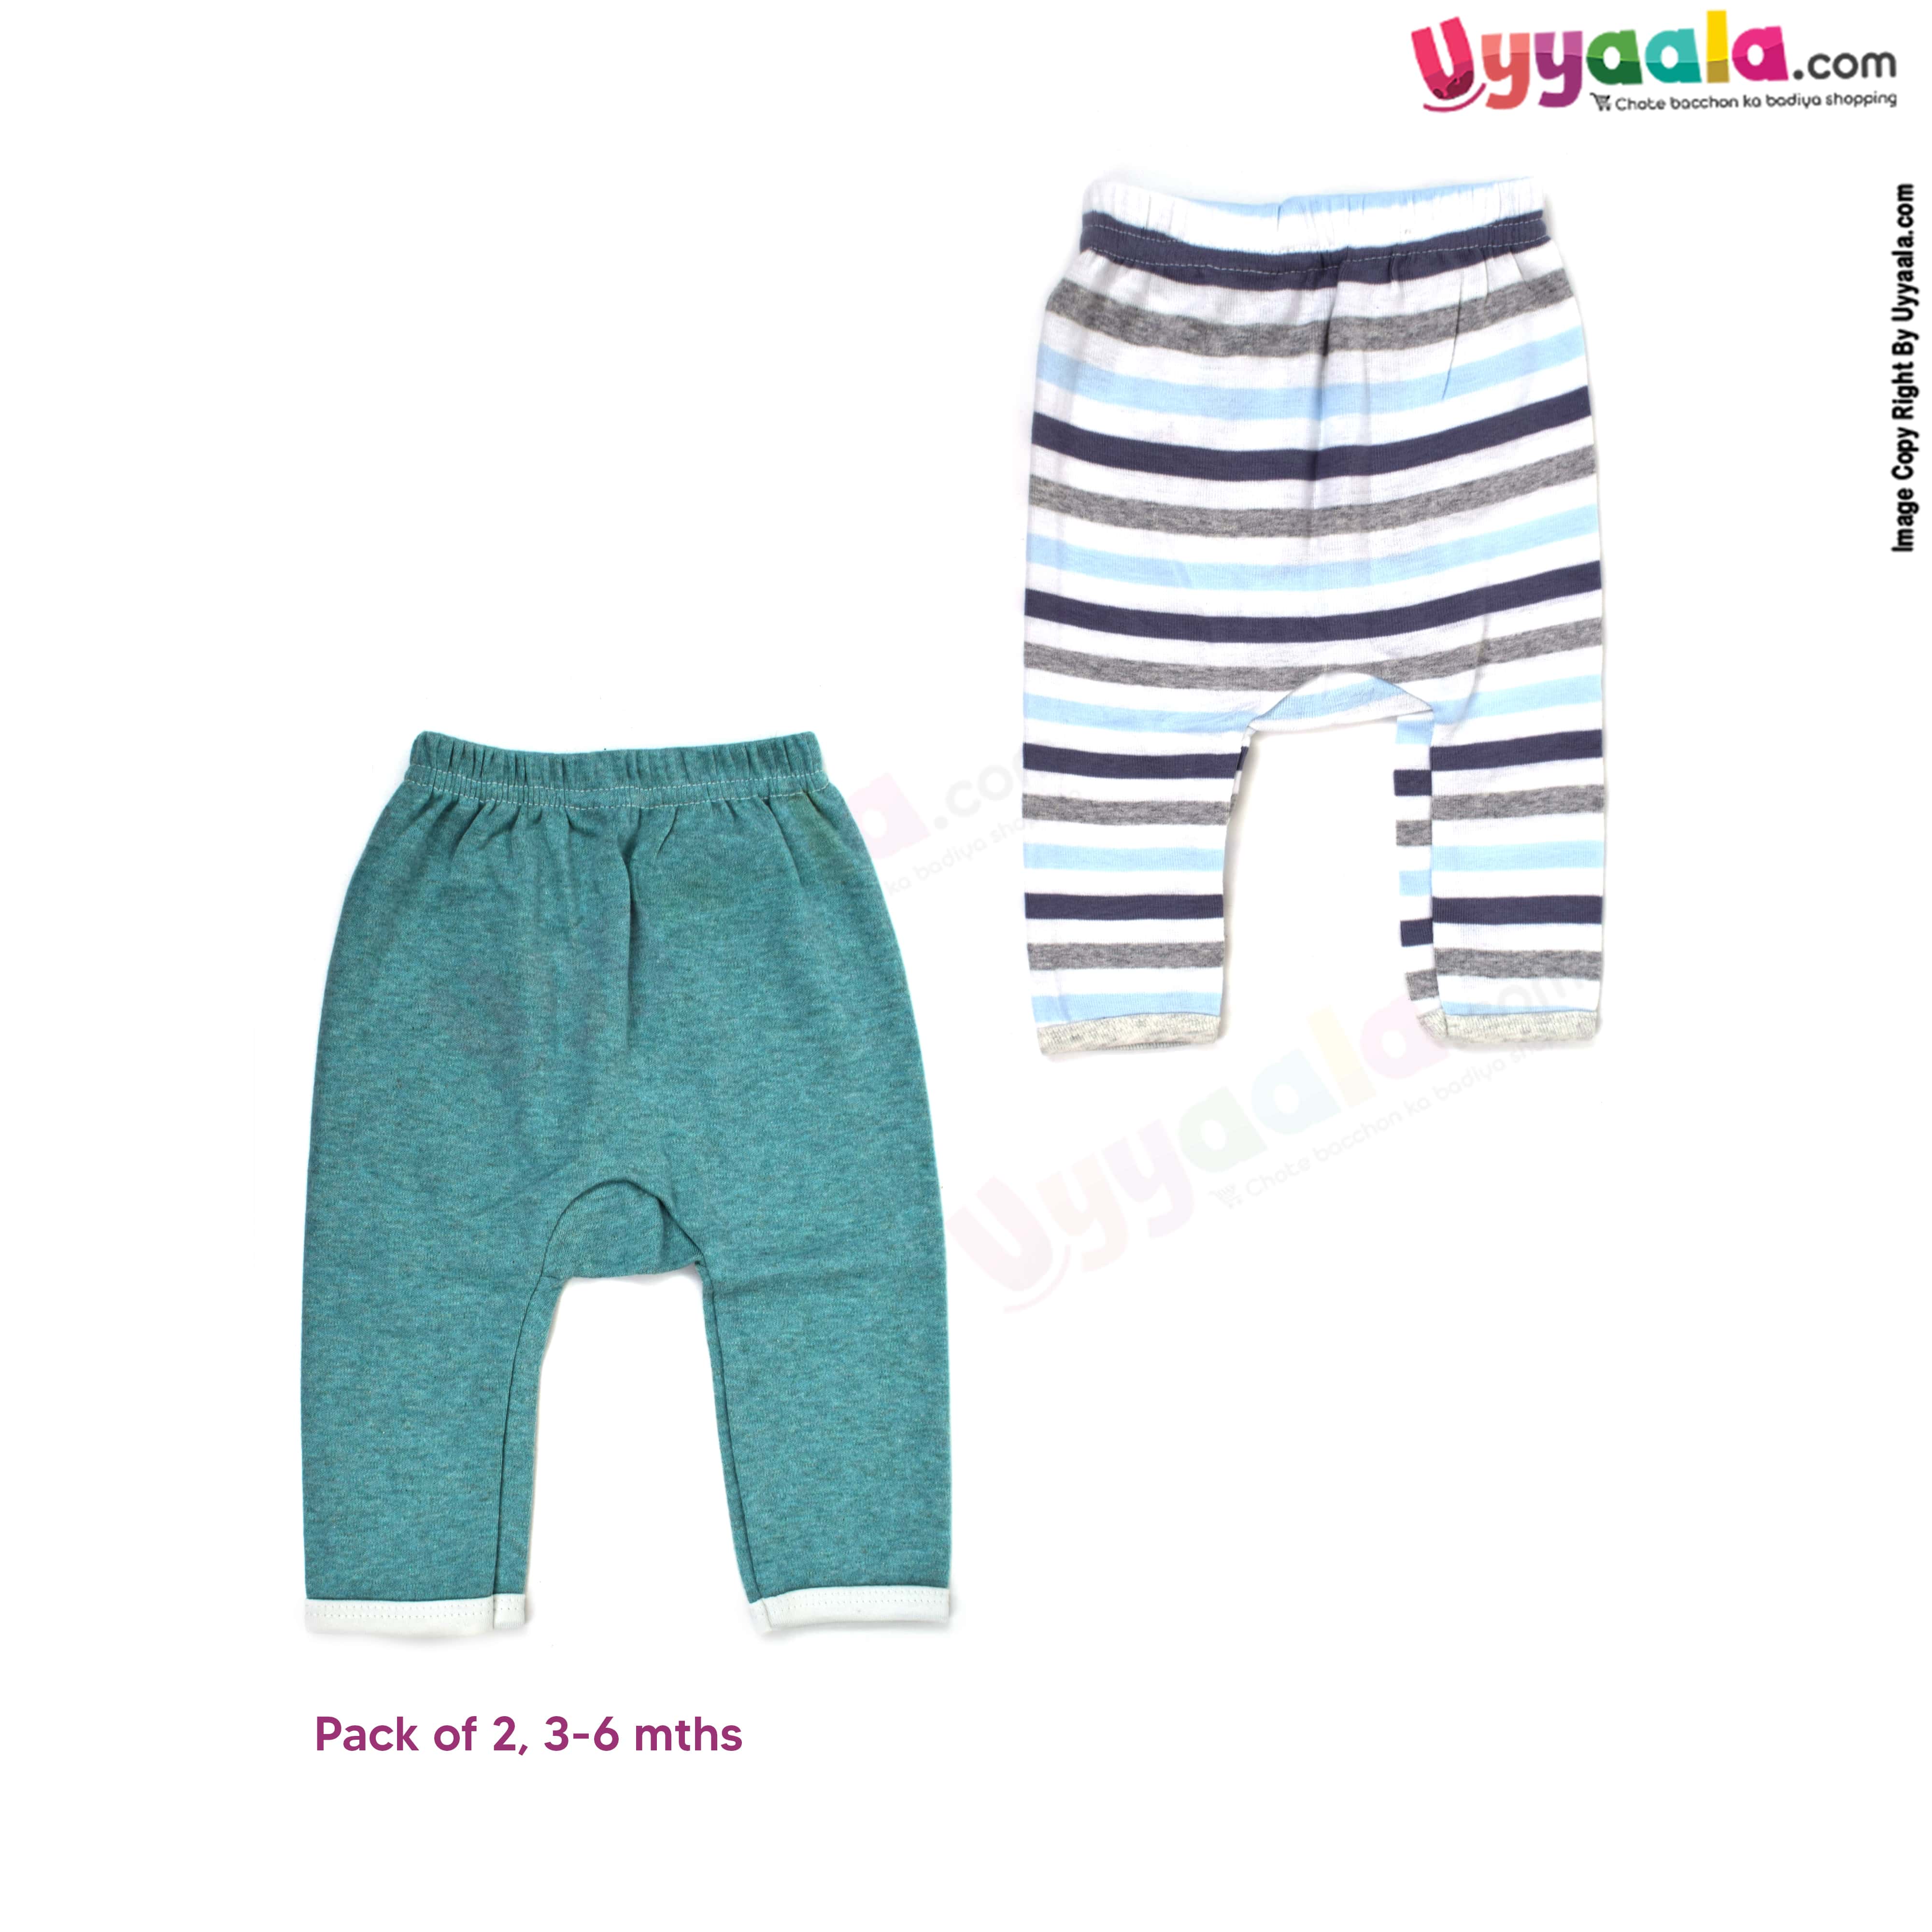 PRECIOUS ONE diaper pants 100% soft hosiery cotton pack of 2 - green & multicolored stripes print (3-6m)